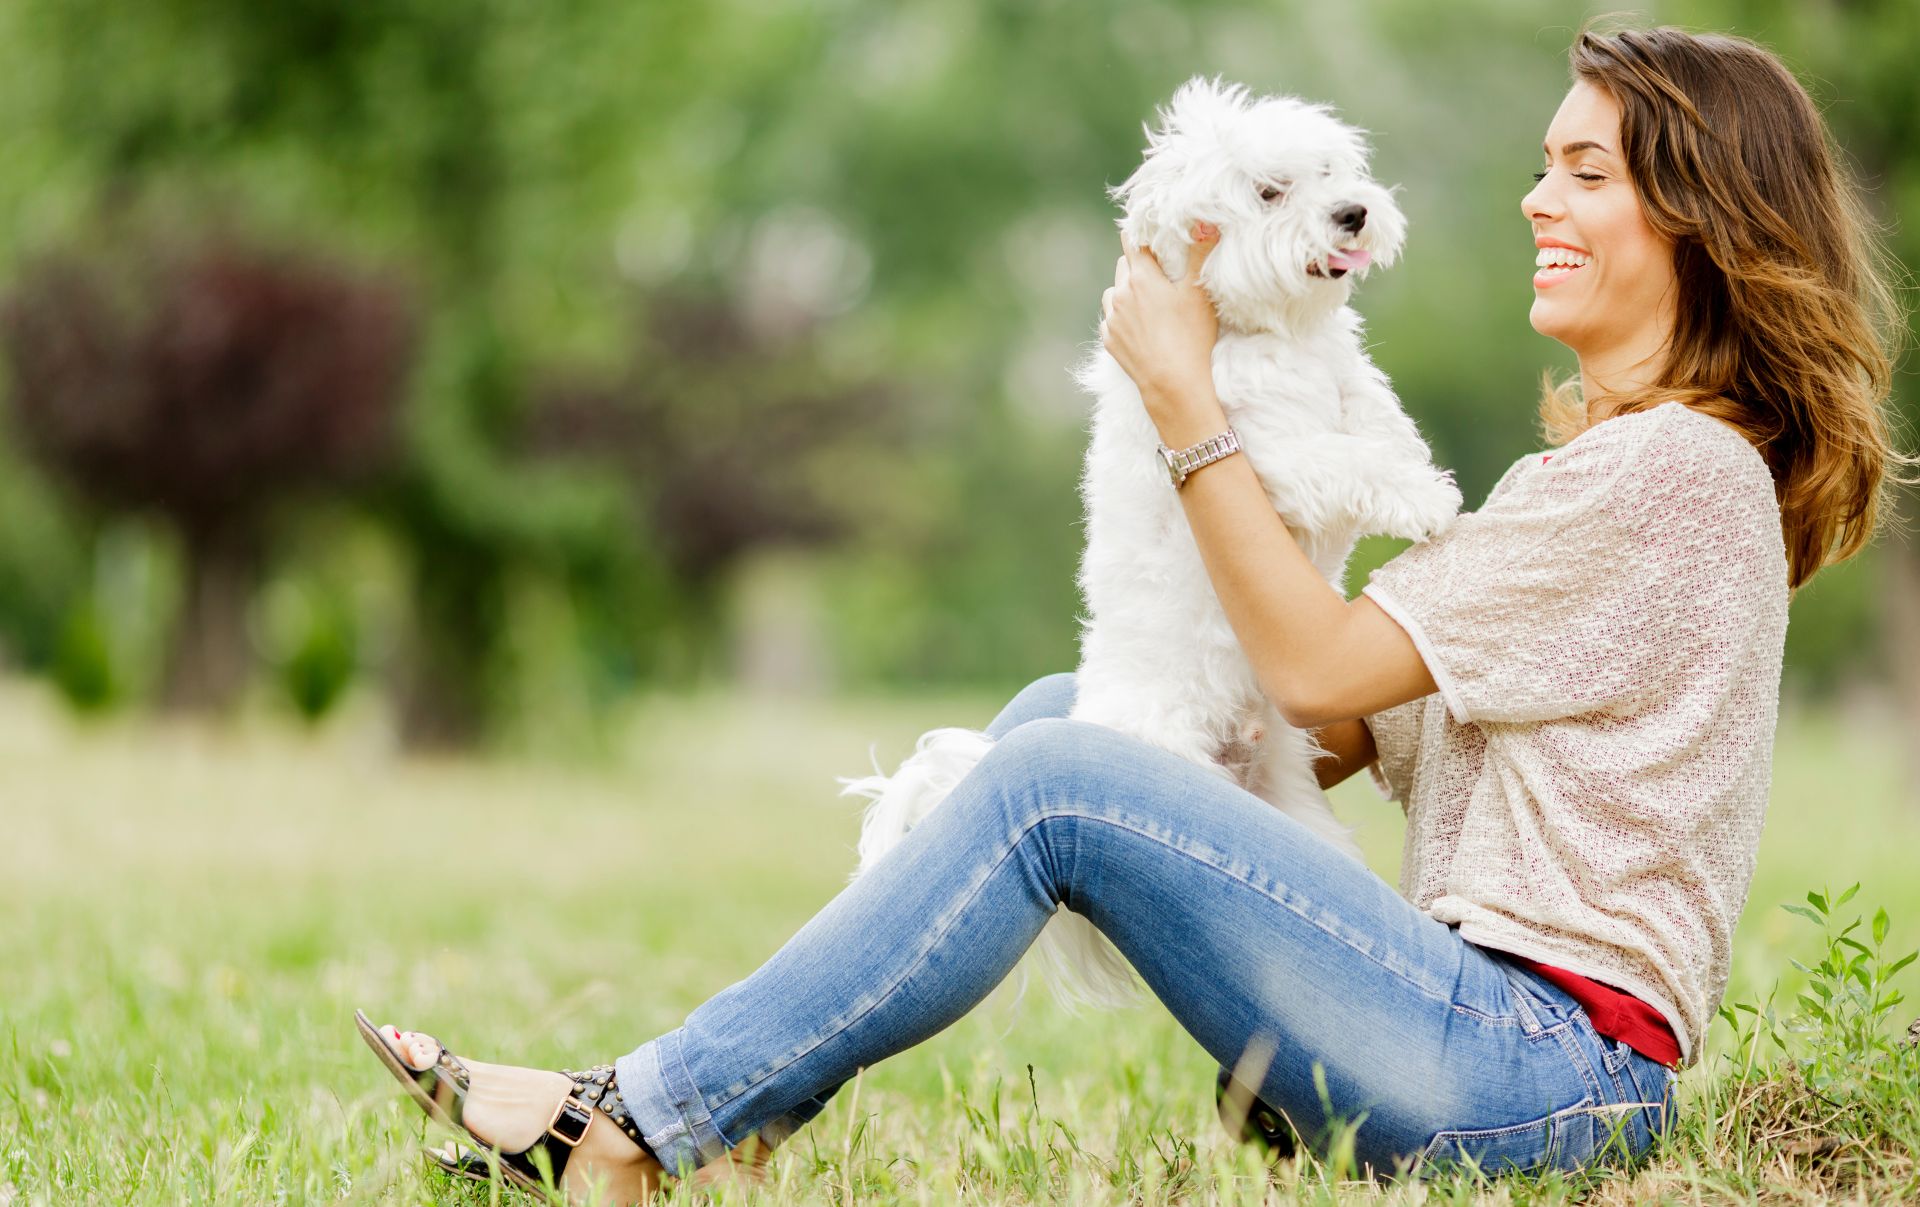 Smiling brunette woman in jeans and cream top sitting on grass holding standing white dog on her lap